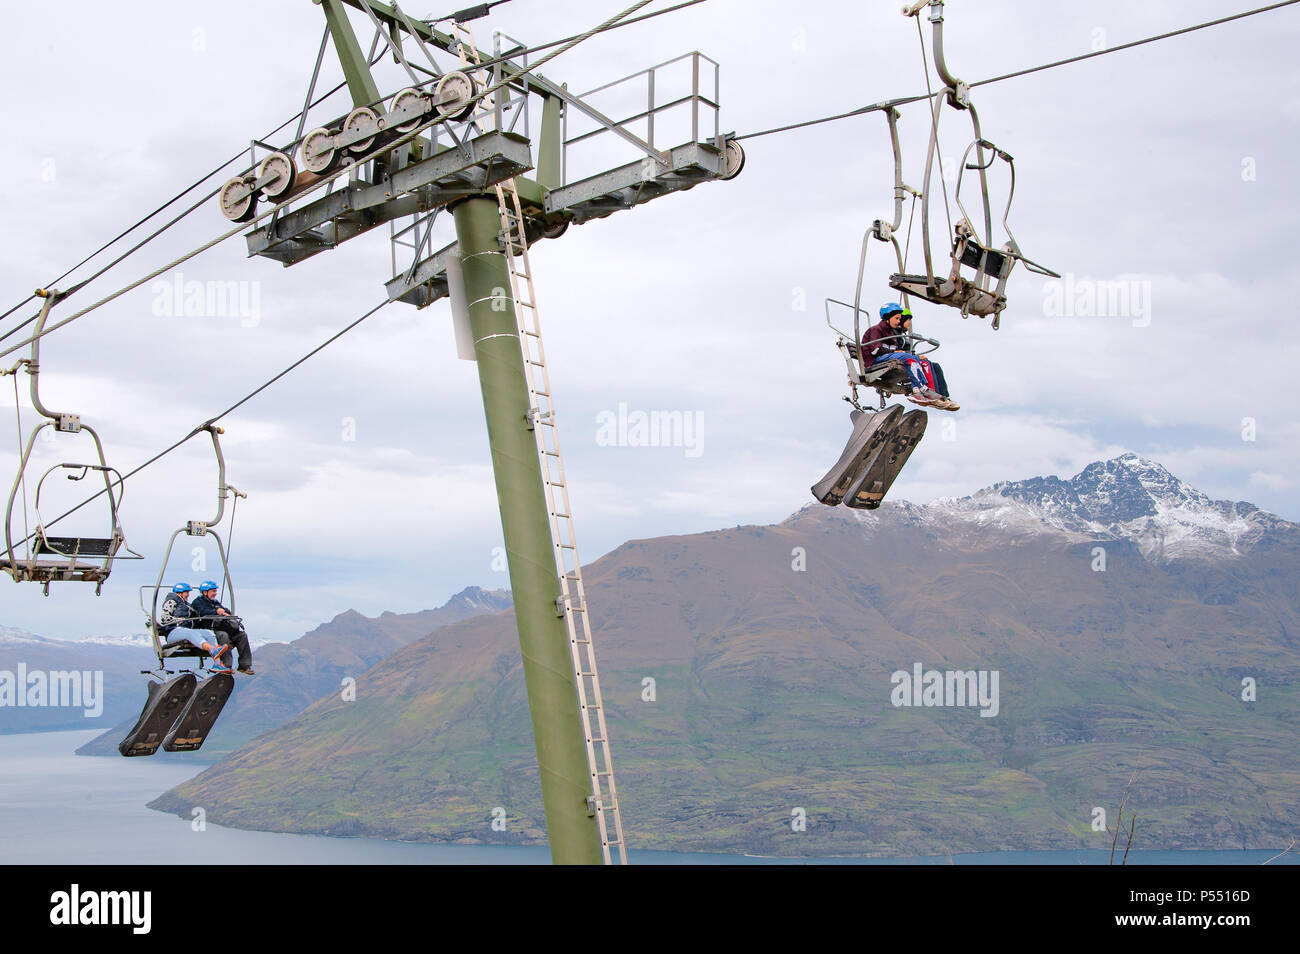 Queenstown, NZ – April 15, 2018: Fun riders with their carts on a cable chair lift going up the hill top for a luge ride with views of Lake and hills. Stock Photo